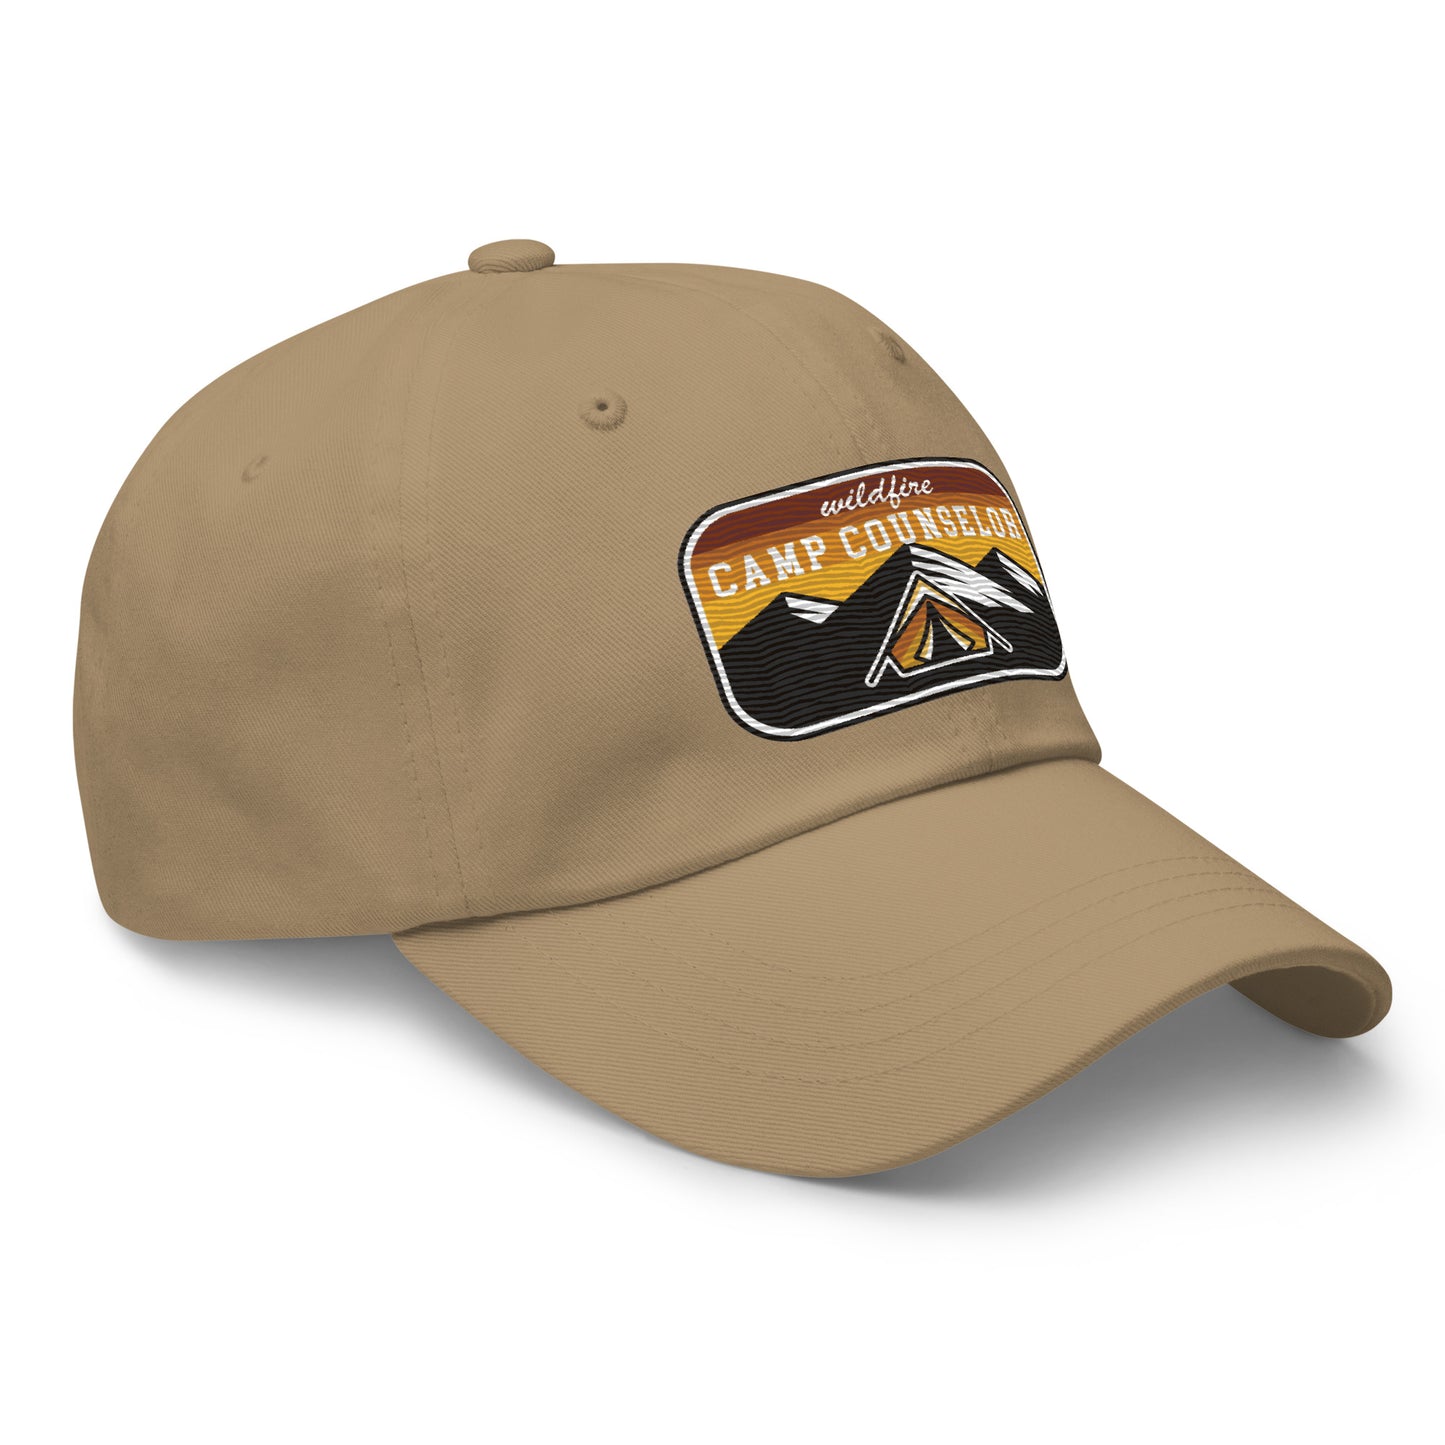 Wildfire Cigars embroidered khaki dad hat facing the front right